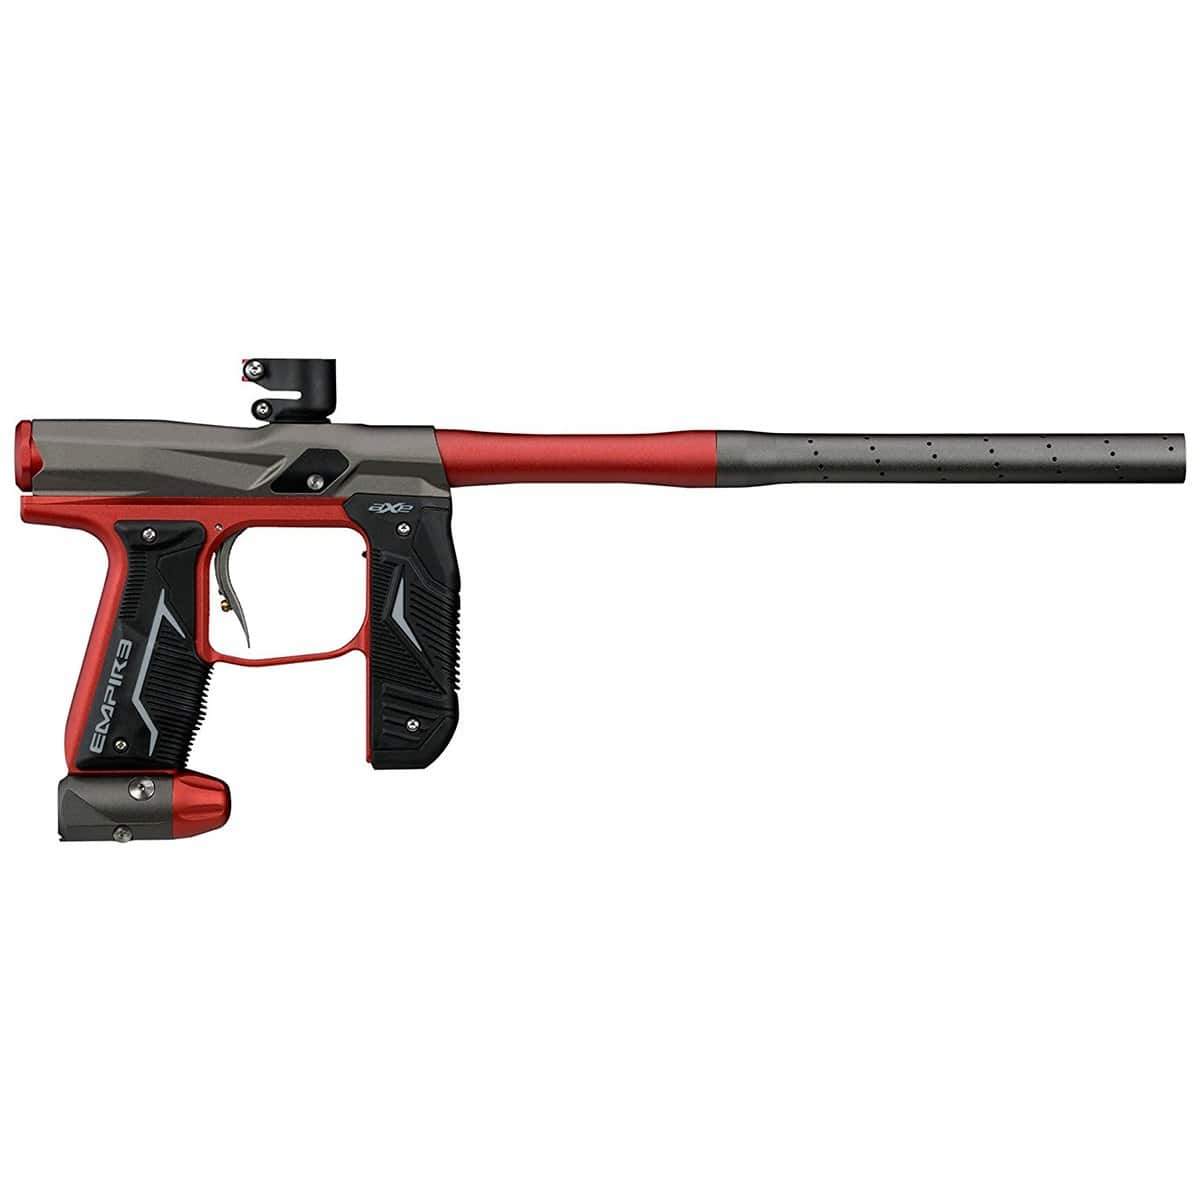 Empire Axe 2.0 Marker - Dust Black / Dust Red - Eminent Paintball And Airsoft